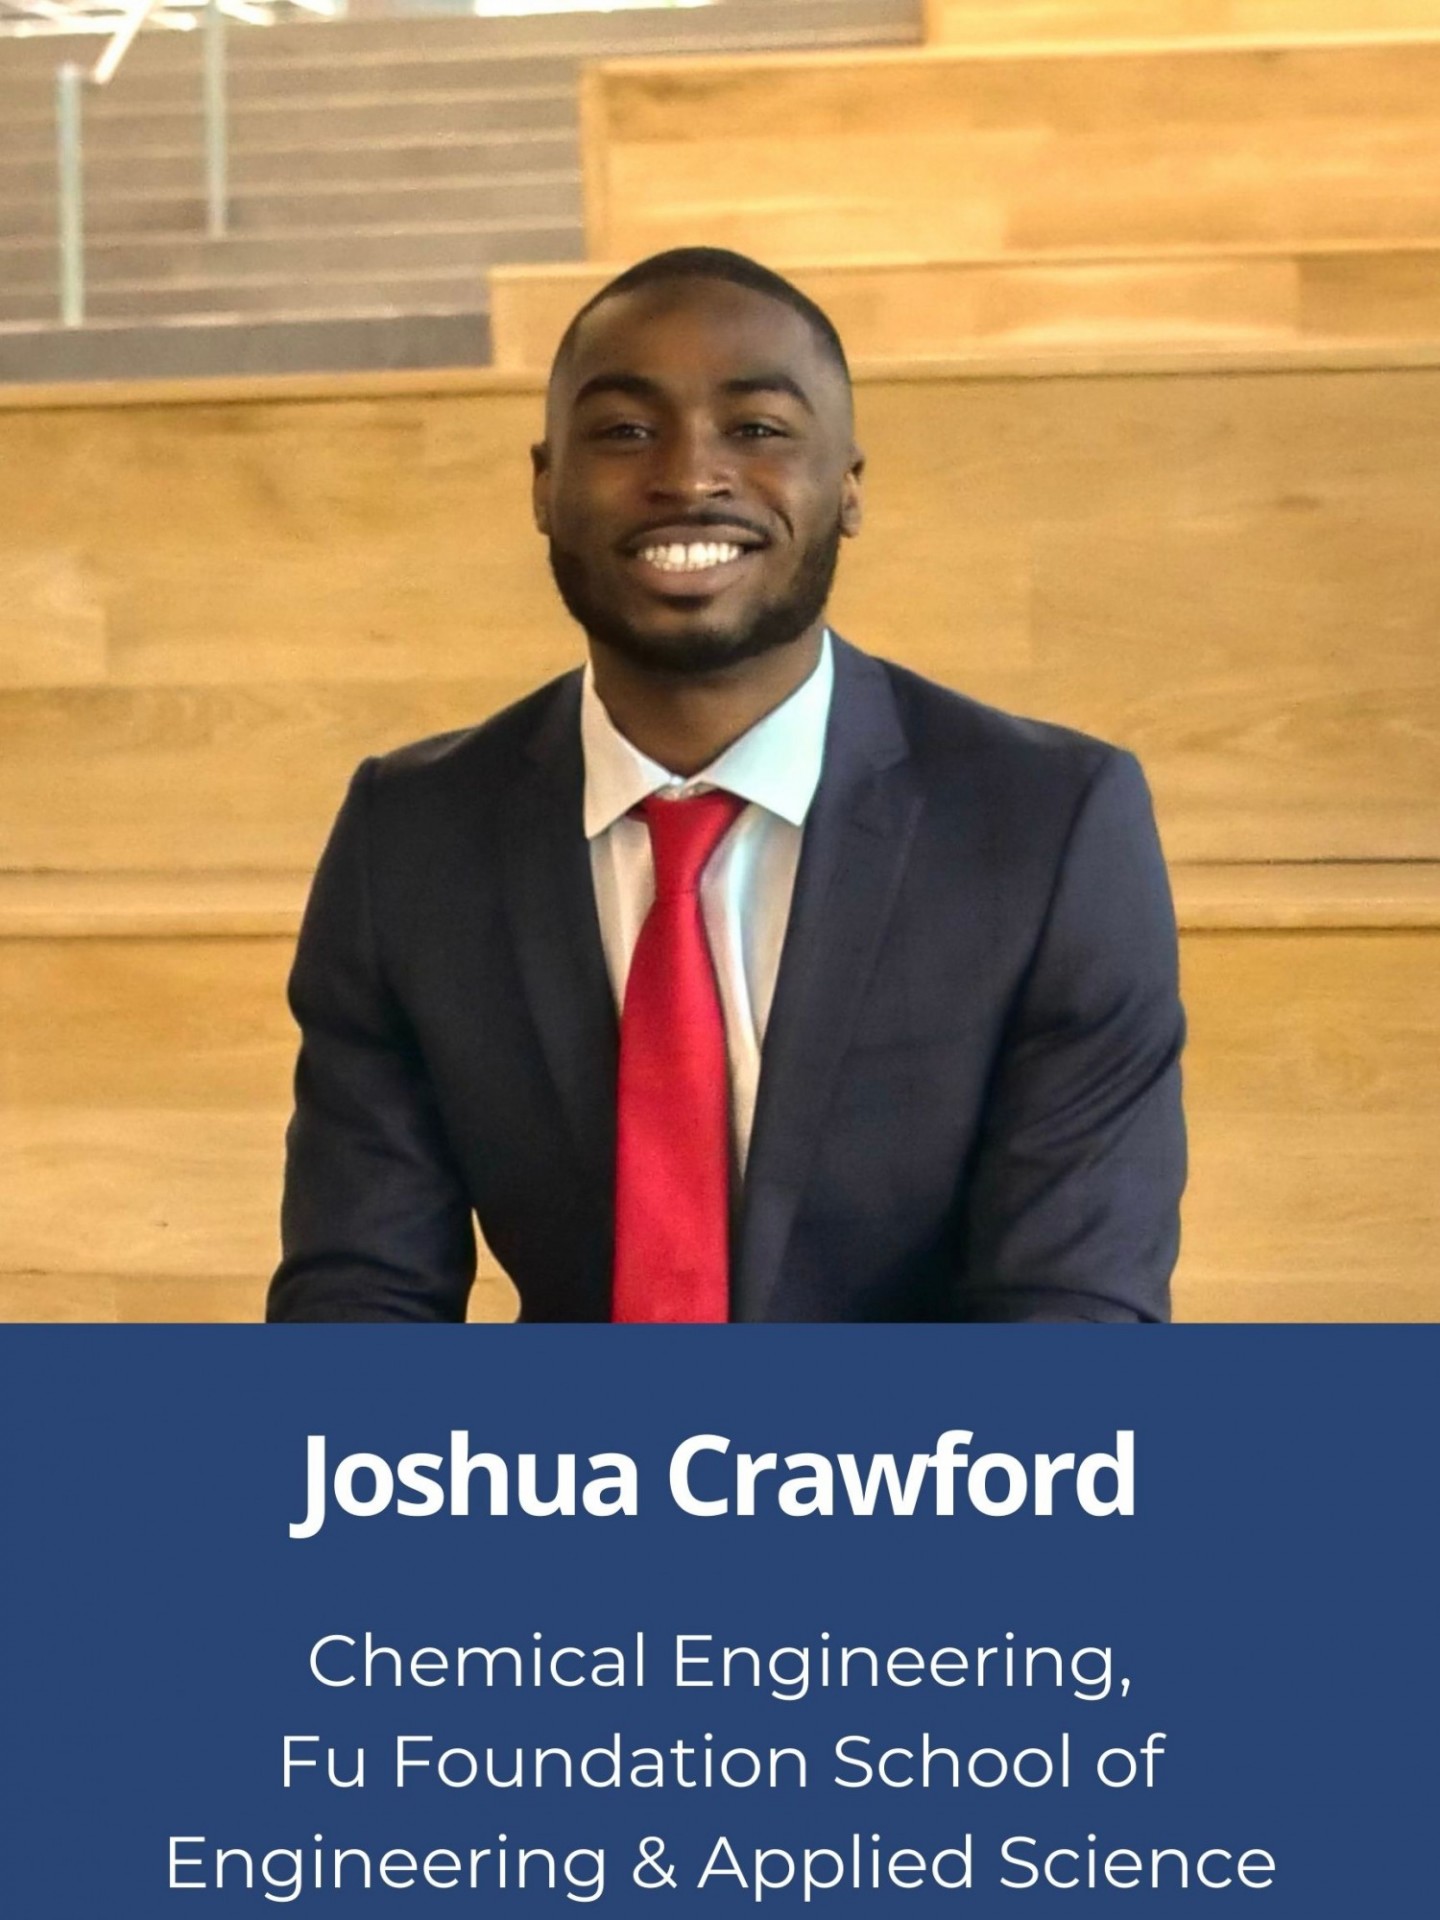 Joshua Crawford, Chemical Engineering, Fu Foundation School of Engineering and Applied Sciences